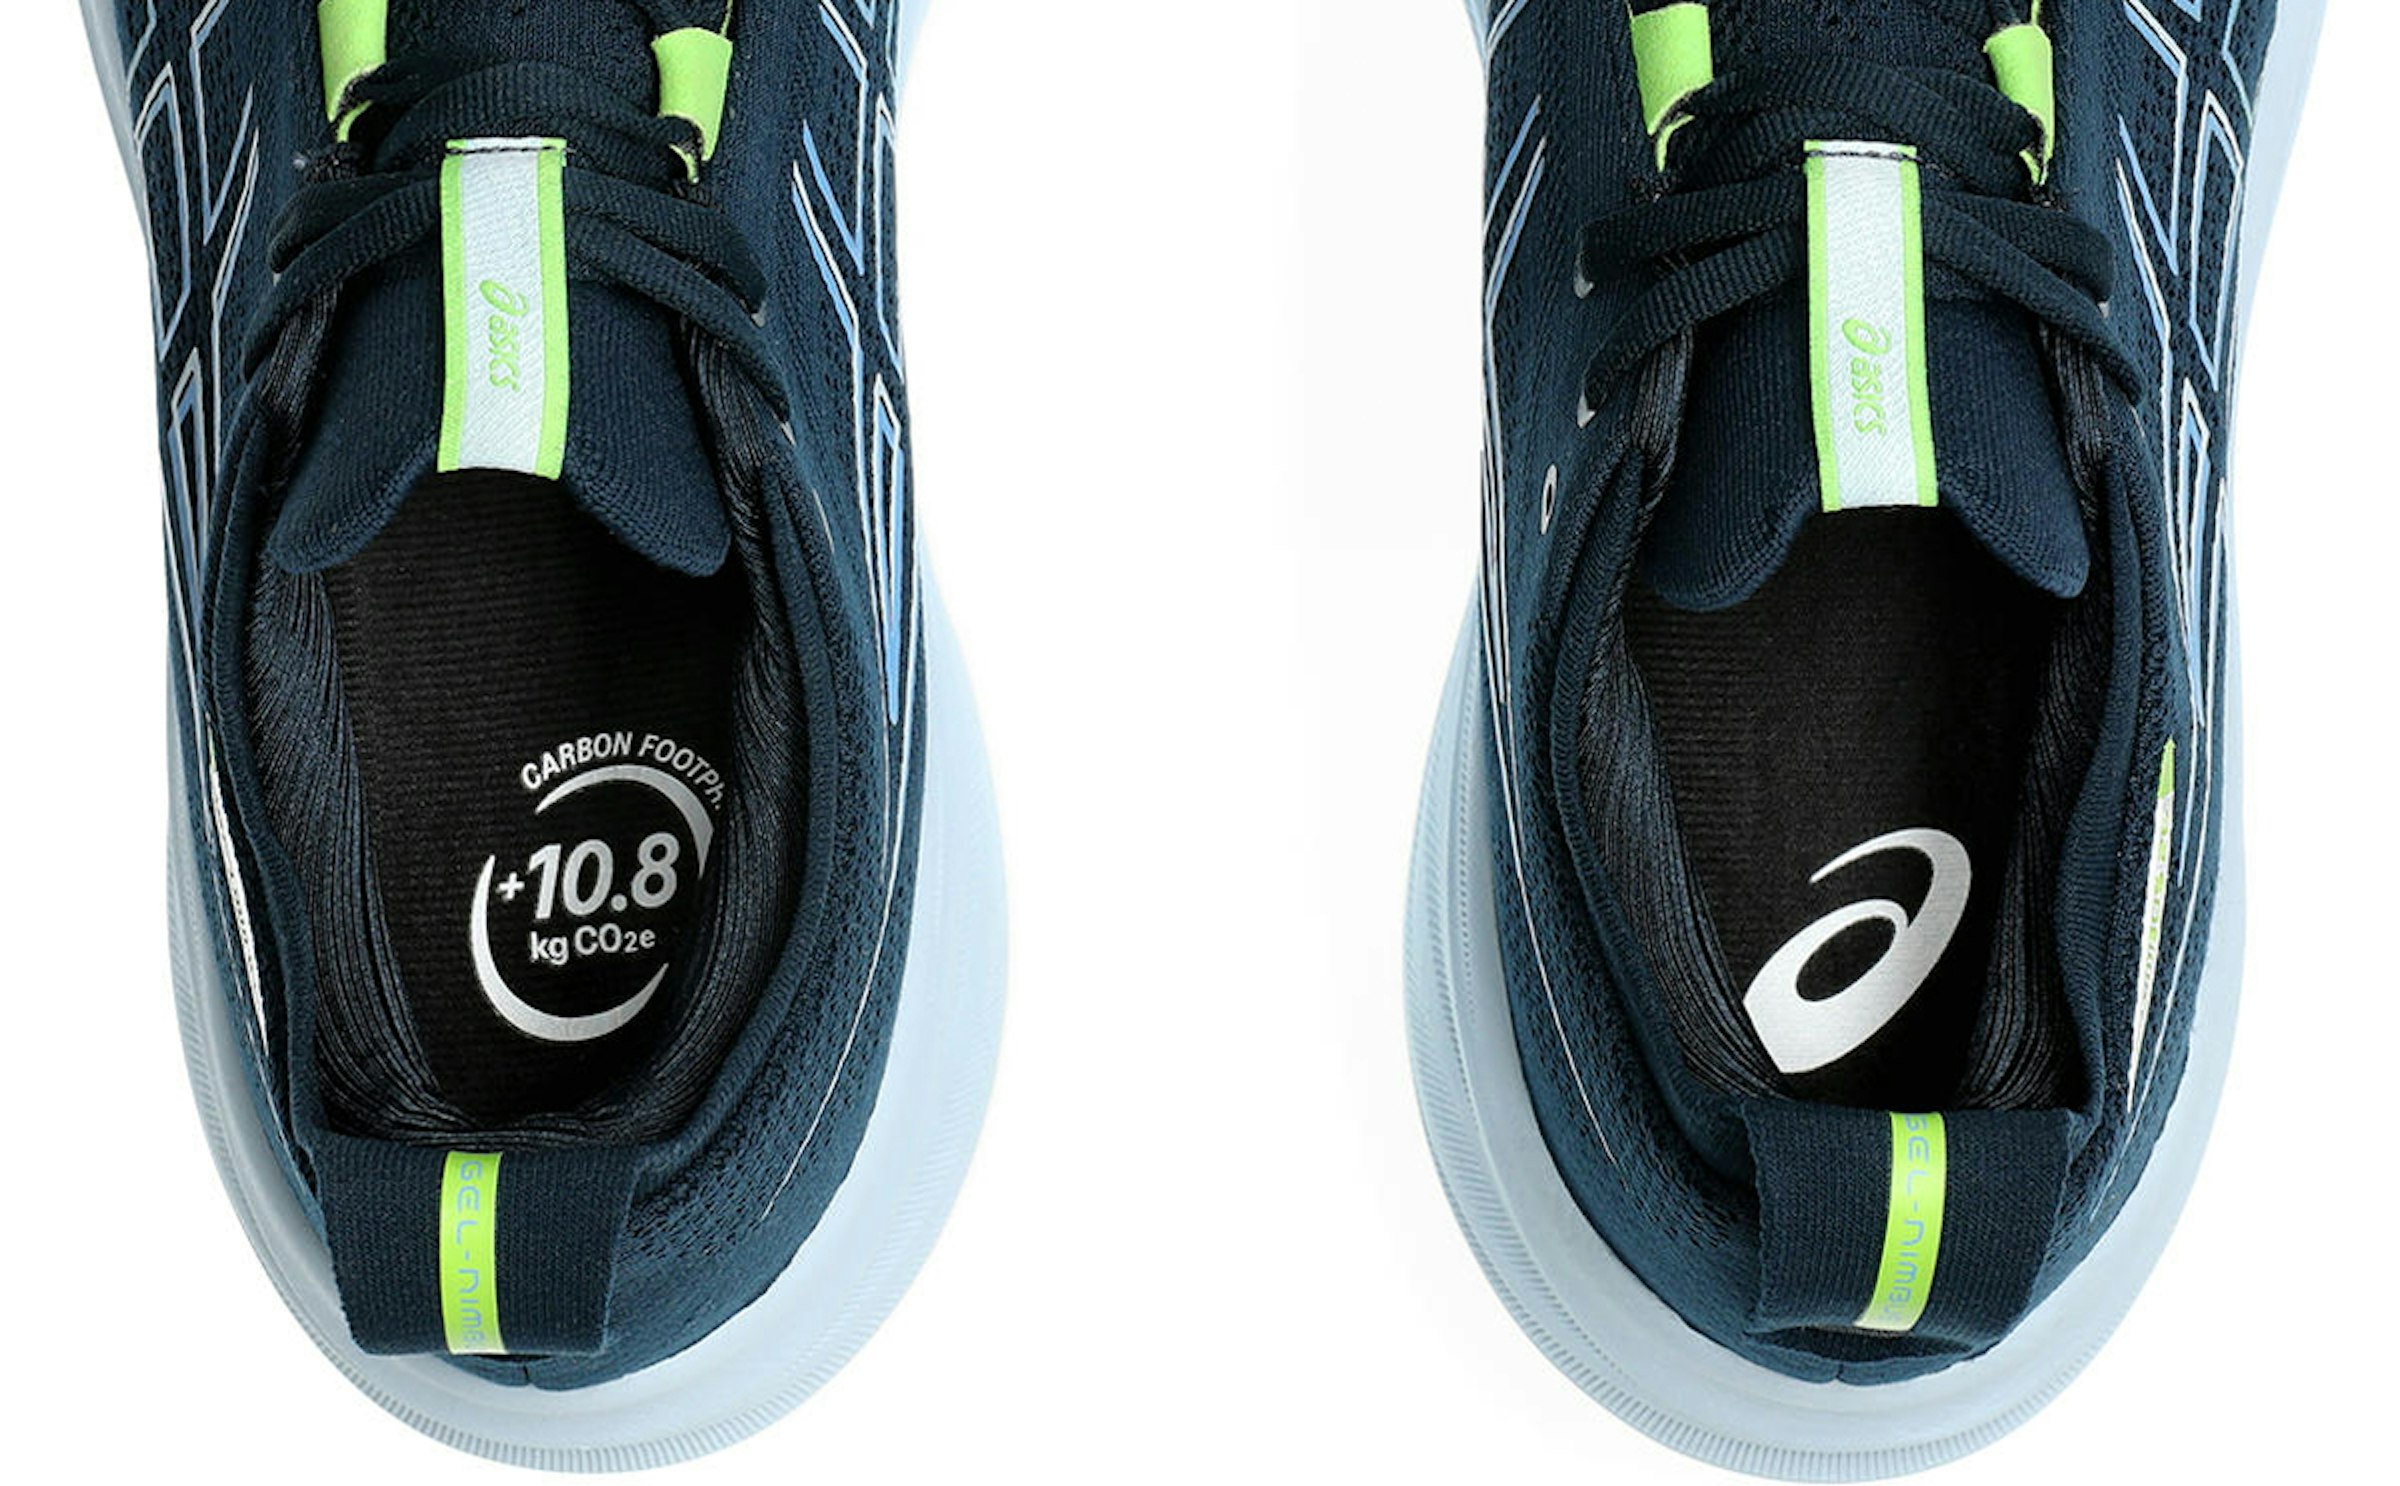 The carbon footprint is displayed on the insole